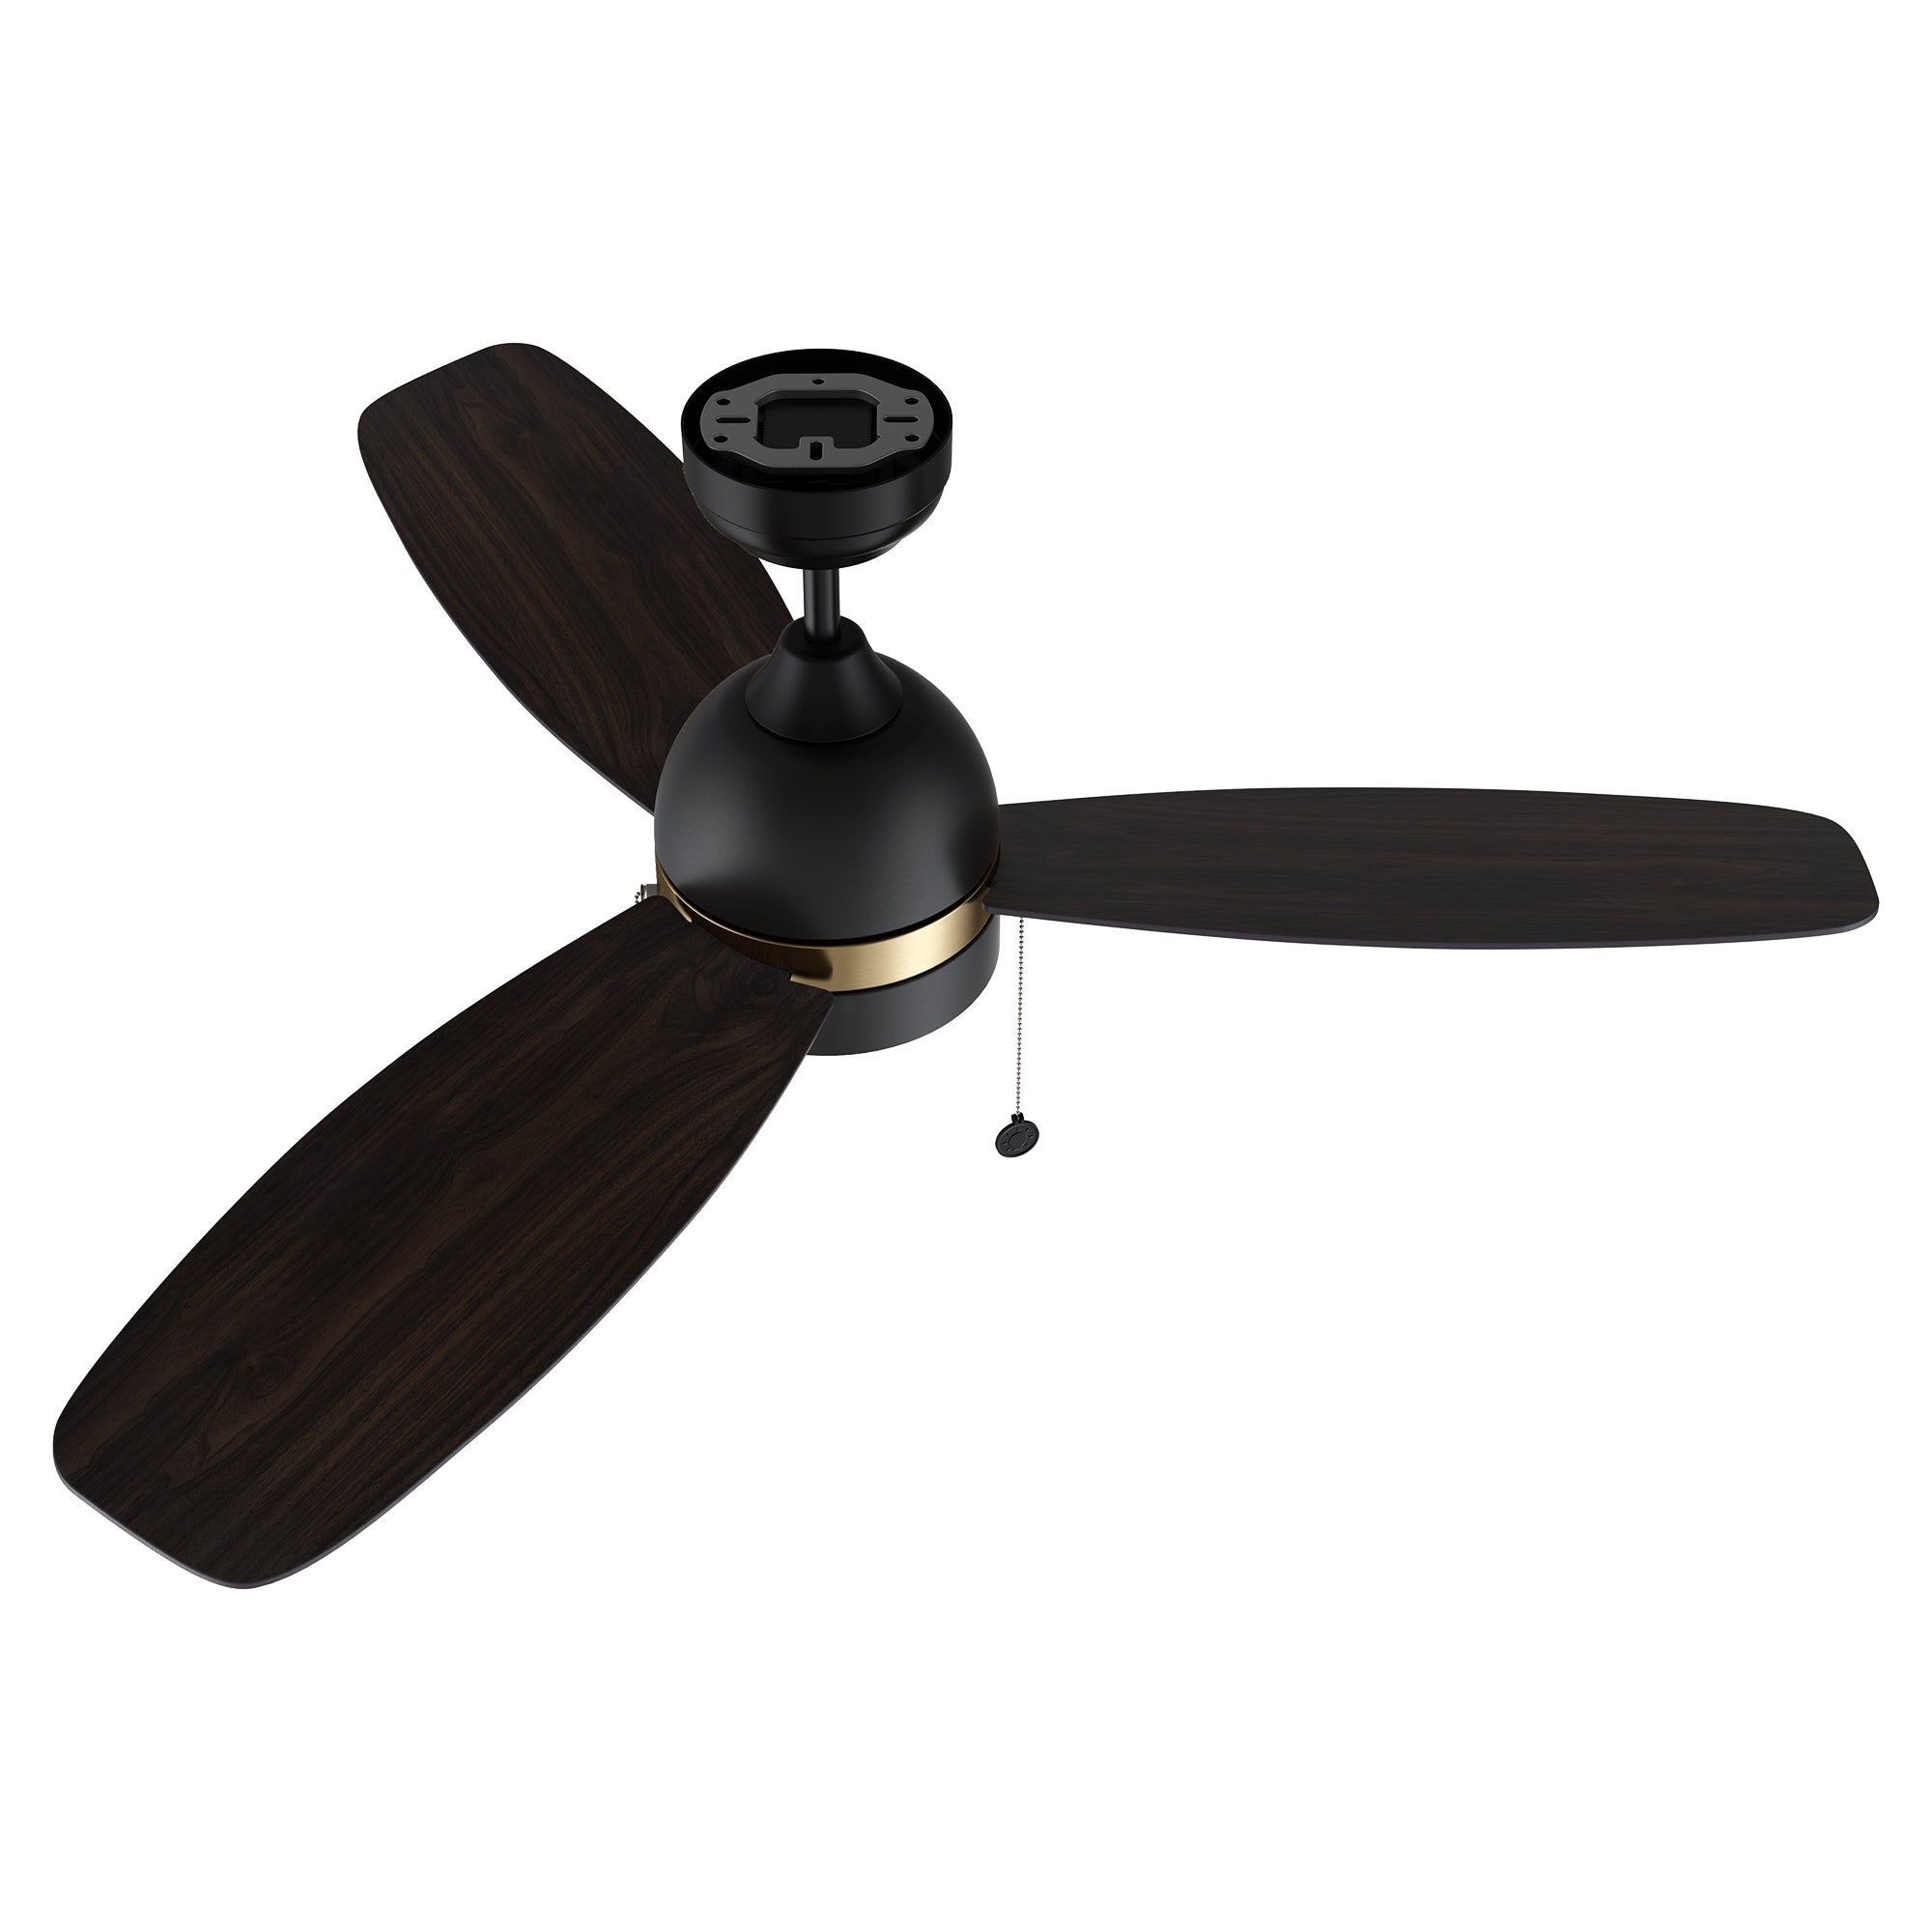 Striking and natural dark wood finish on the fan blades. Enhances the Carro Tesoro pull chain ceiling fan&#39;s overall aesthetic with a touch of warmth and sophistication. 